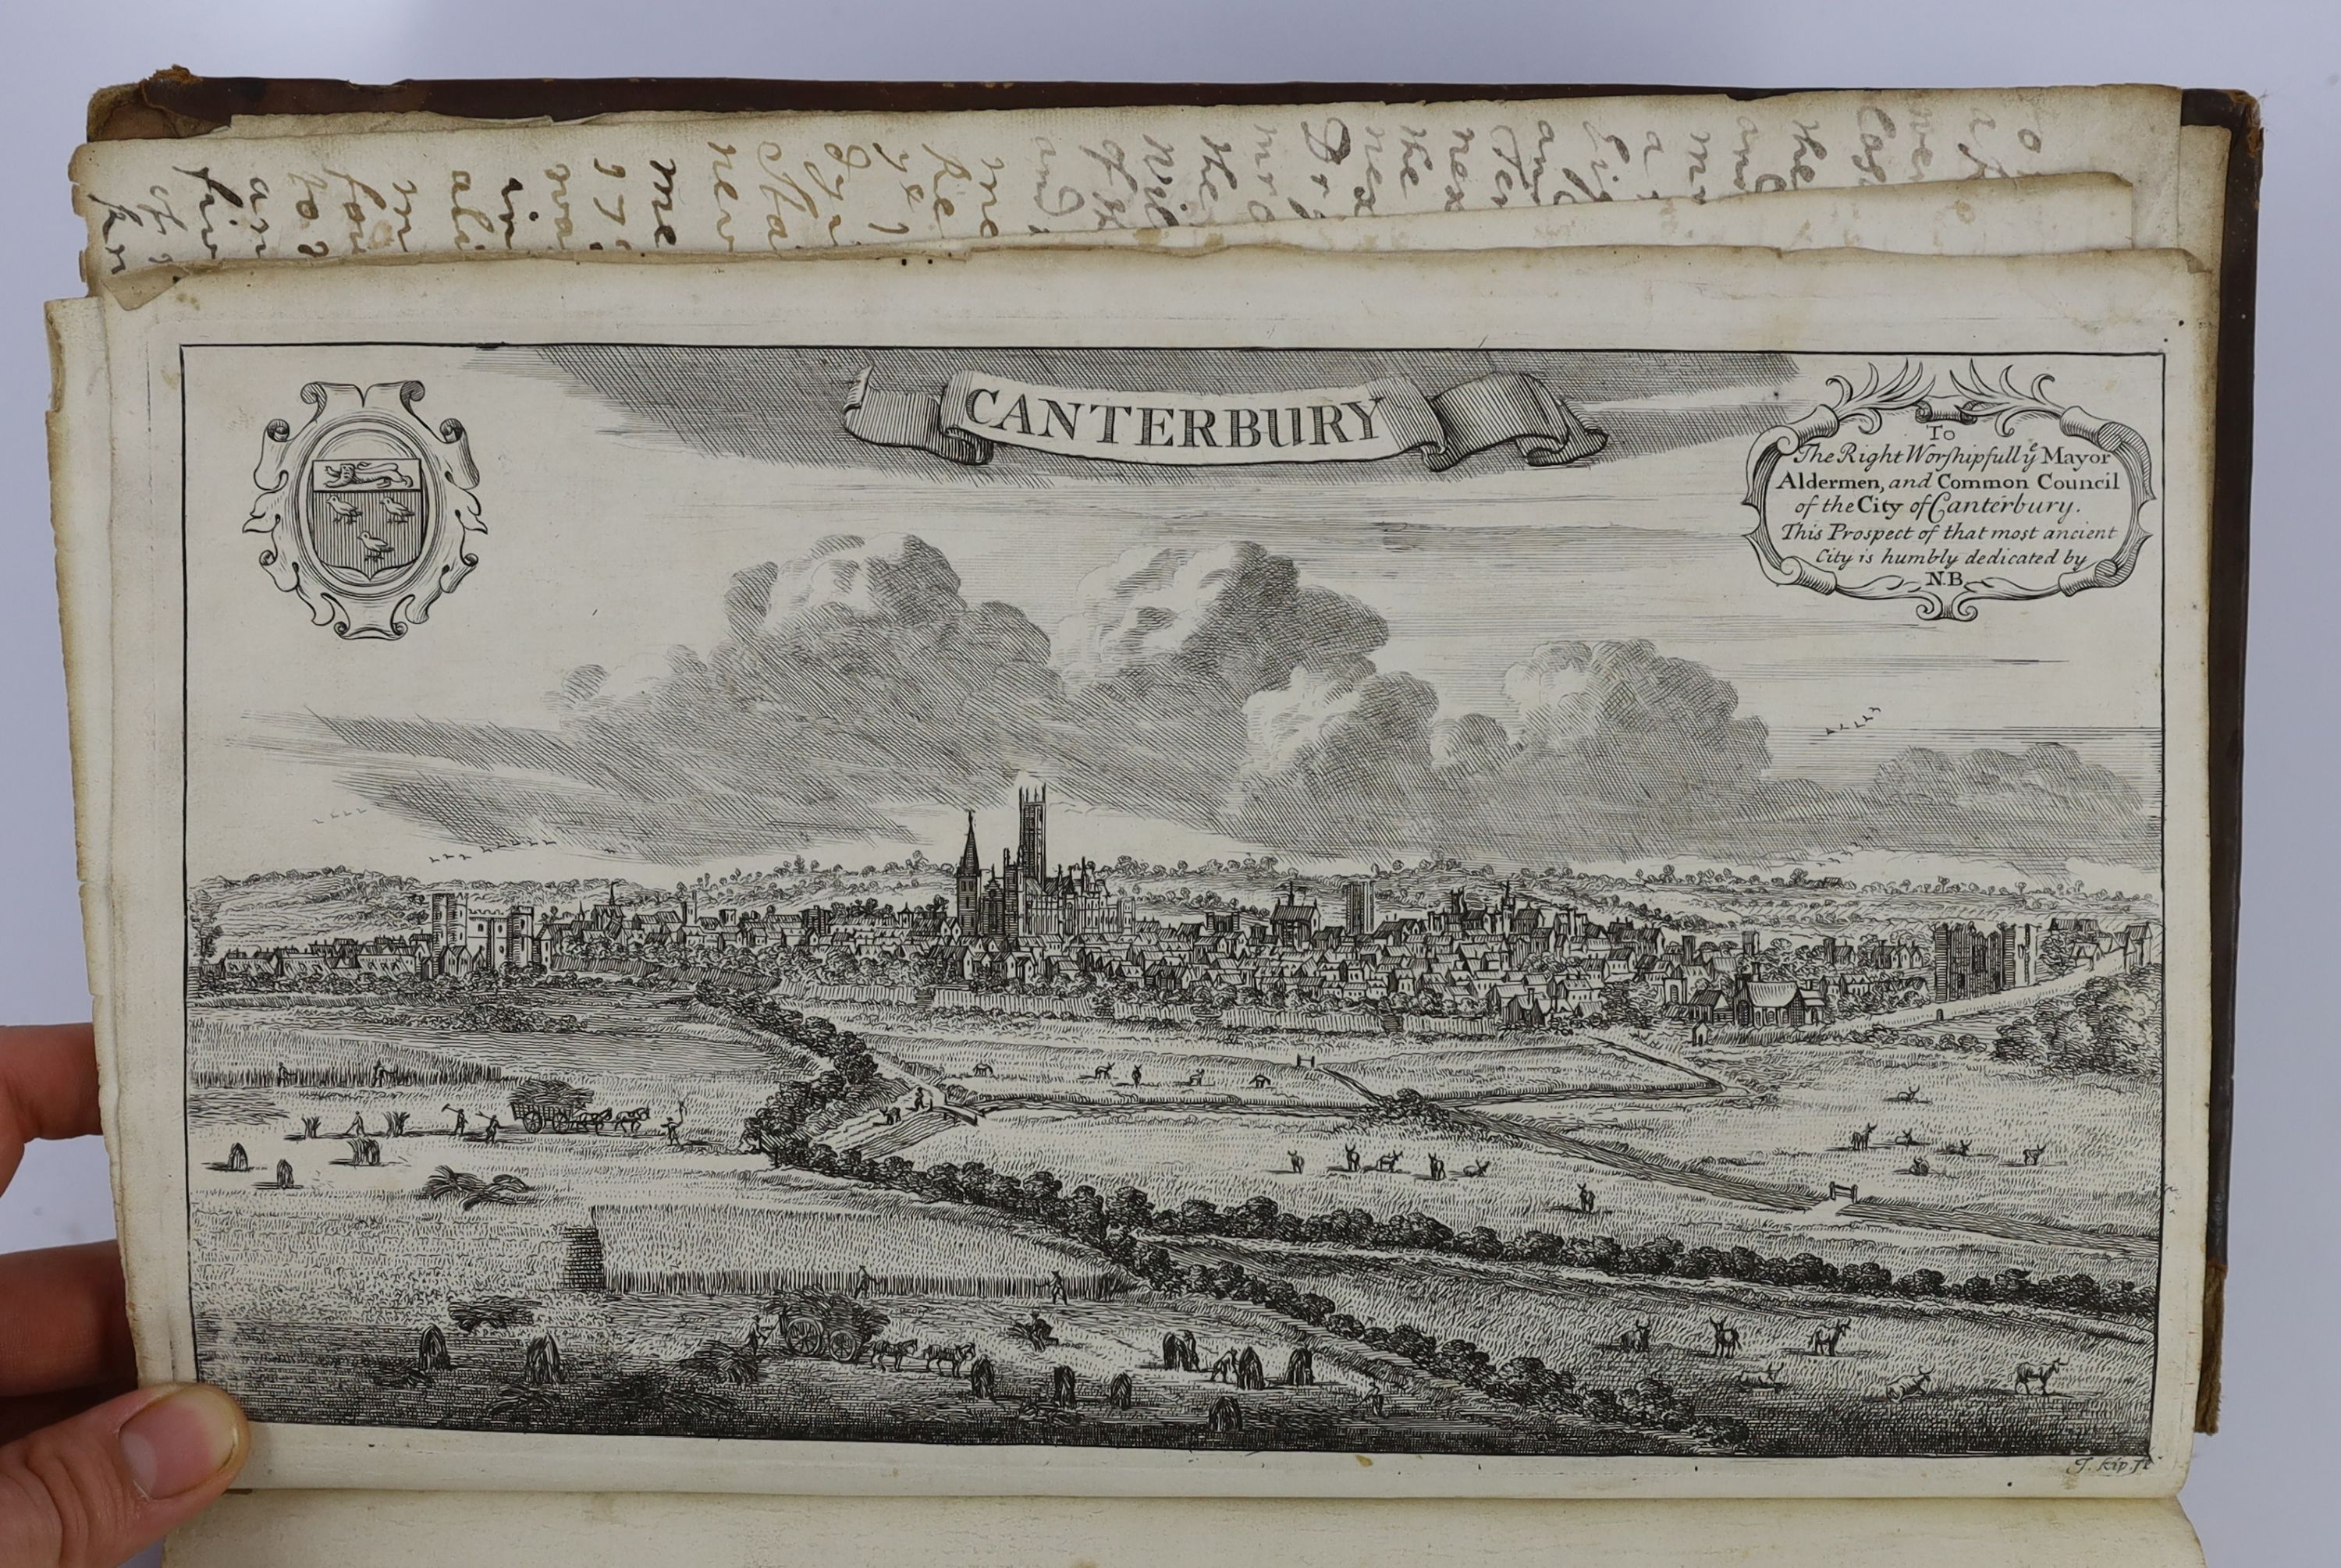 Somner, William, - The Antiquities of Canterbury in Two Parts, 2nd edition, revised and enlarged by Nicolas Battely (bound as one) folio, calf, with 18 engraved plates, consisting of a frontis panorama of Canterbury, a f